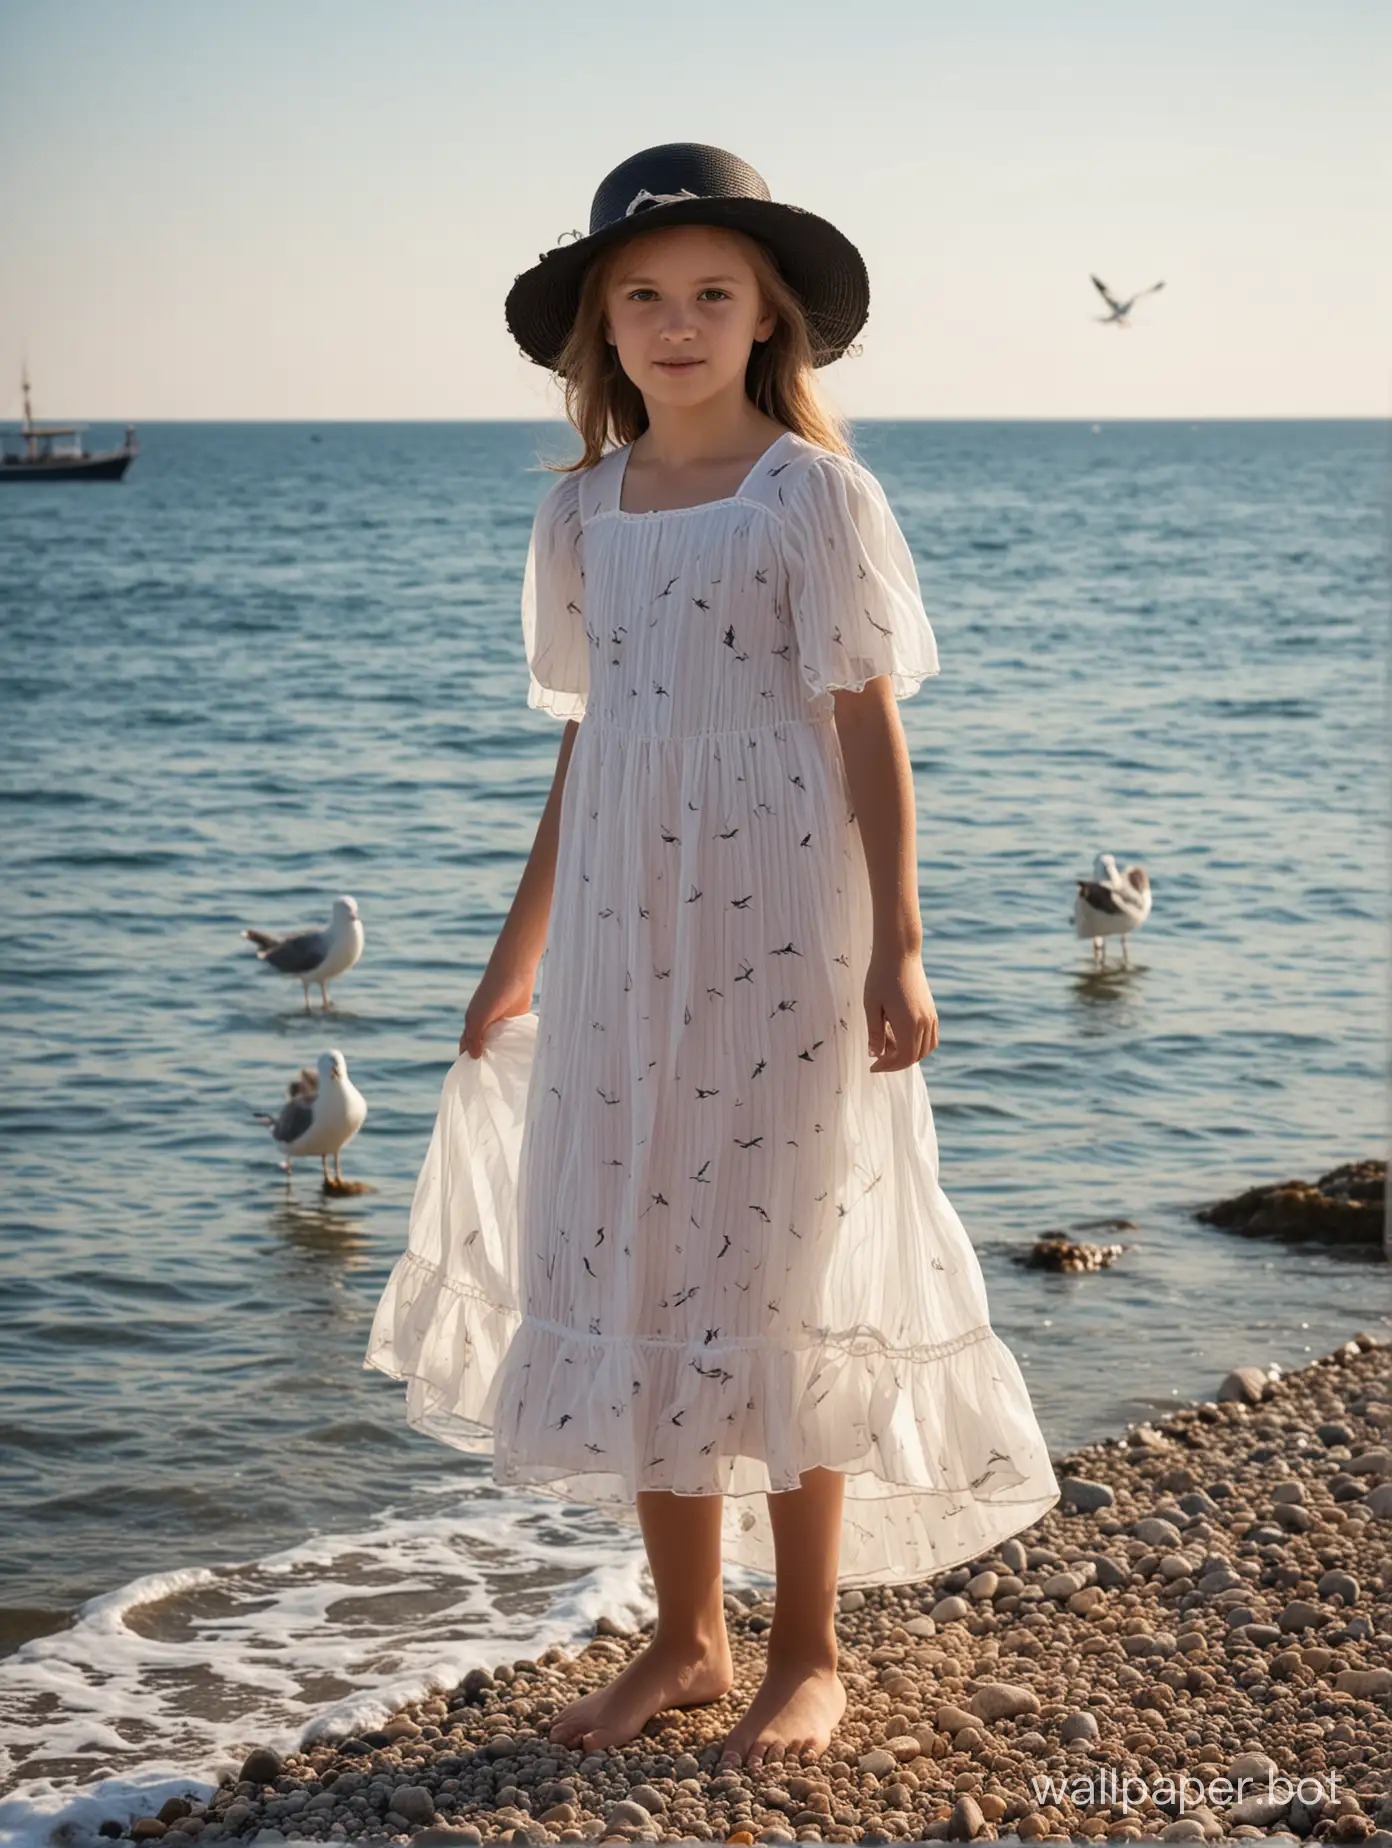 11YearOld-Girl-in-Summer-Dress-by-the-Black-Sea-with-Ship-and-Seagull